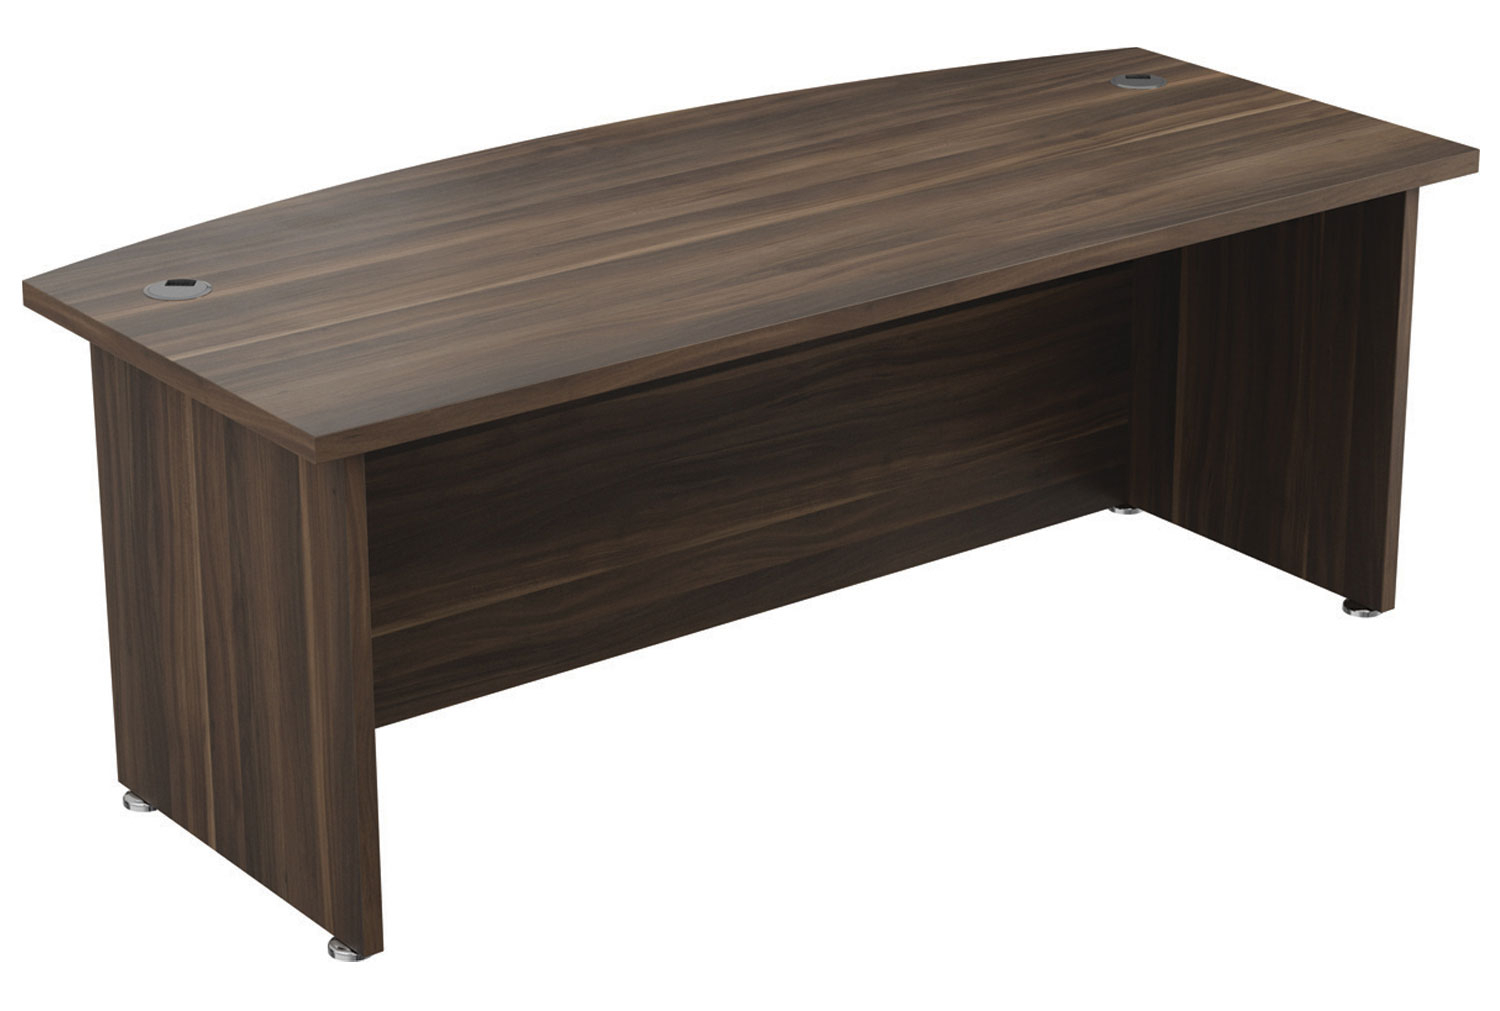 Viceroy Executive Bow Fronted Office Desk, Dark Walnut